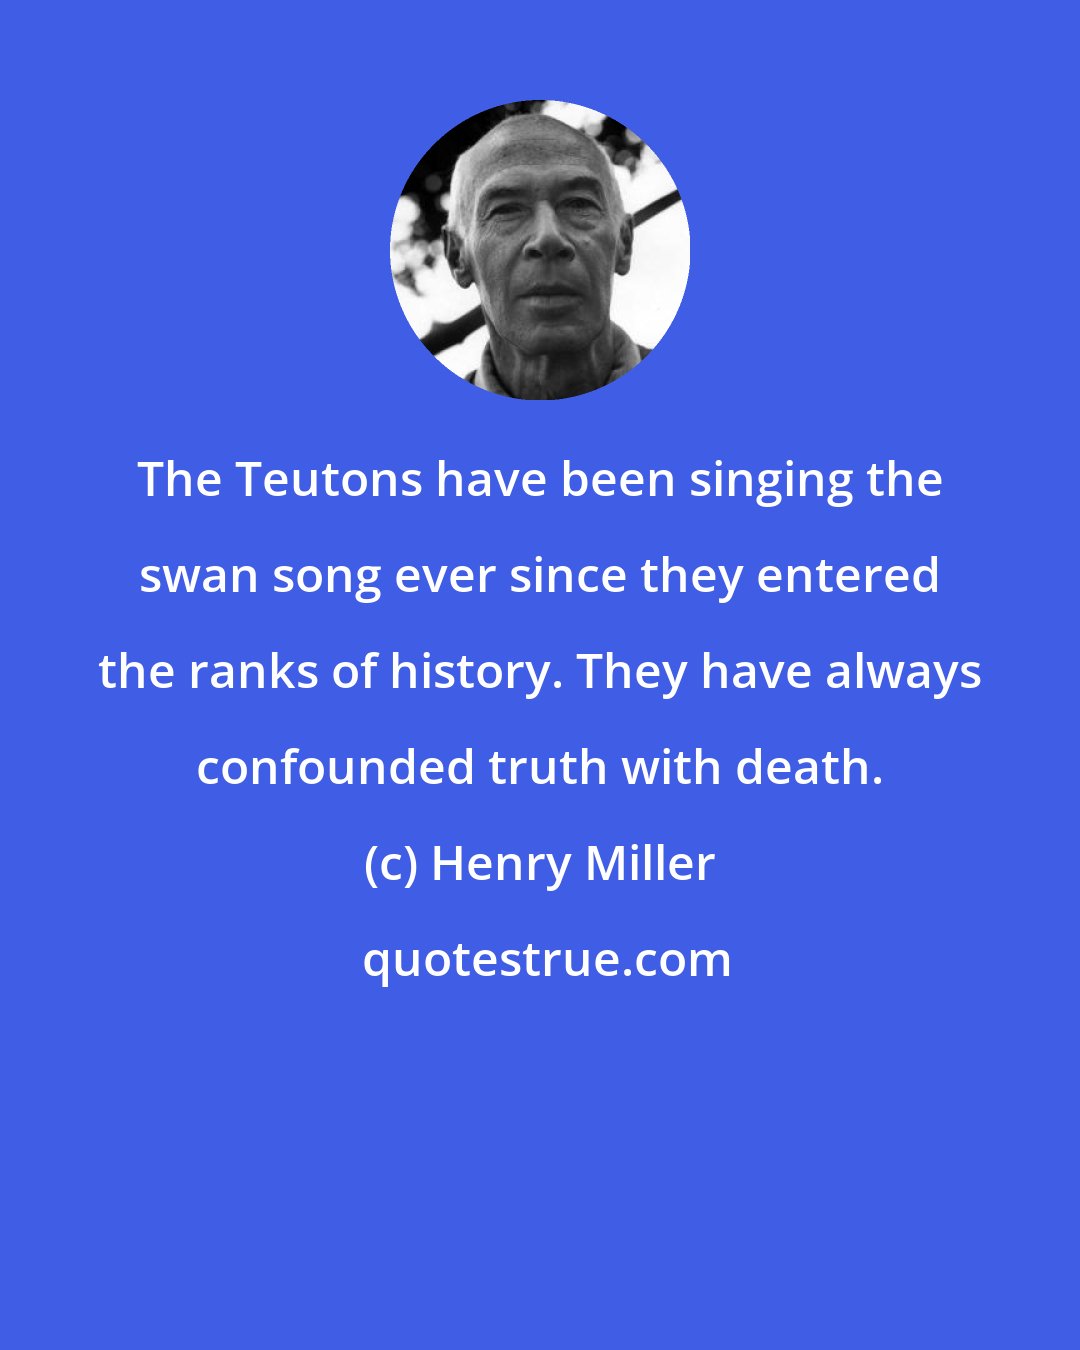 Henry Miller: The Teutons have been singing the swan song ever since they entered the ranks of history. They have always confounded truth with death.